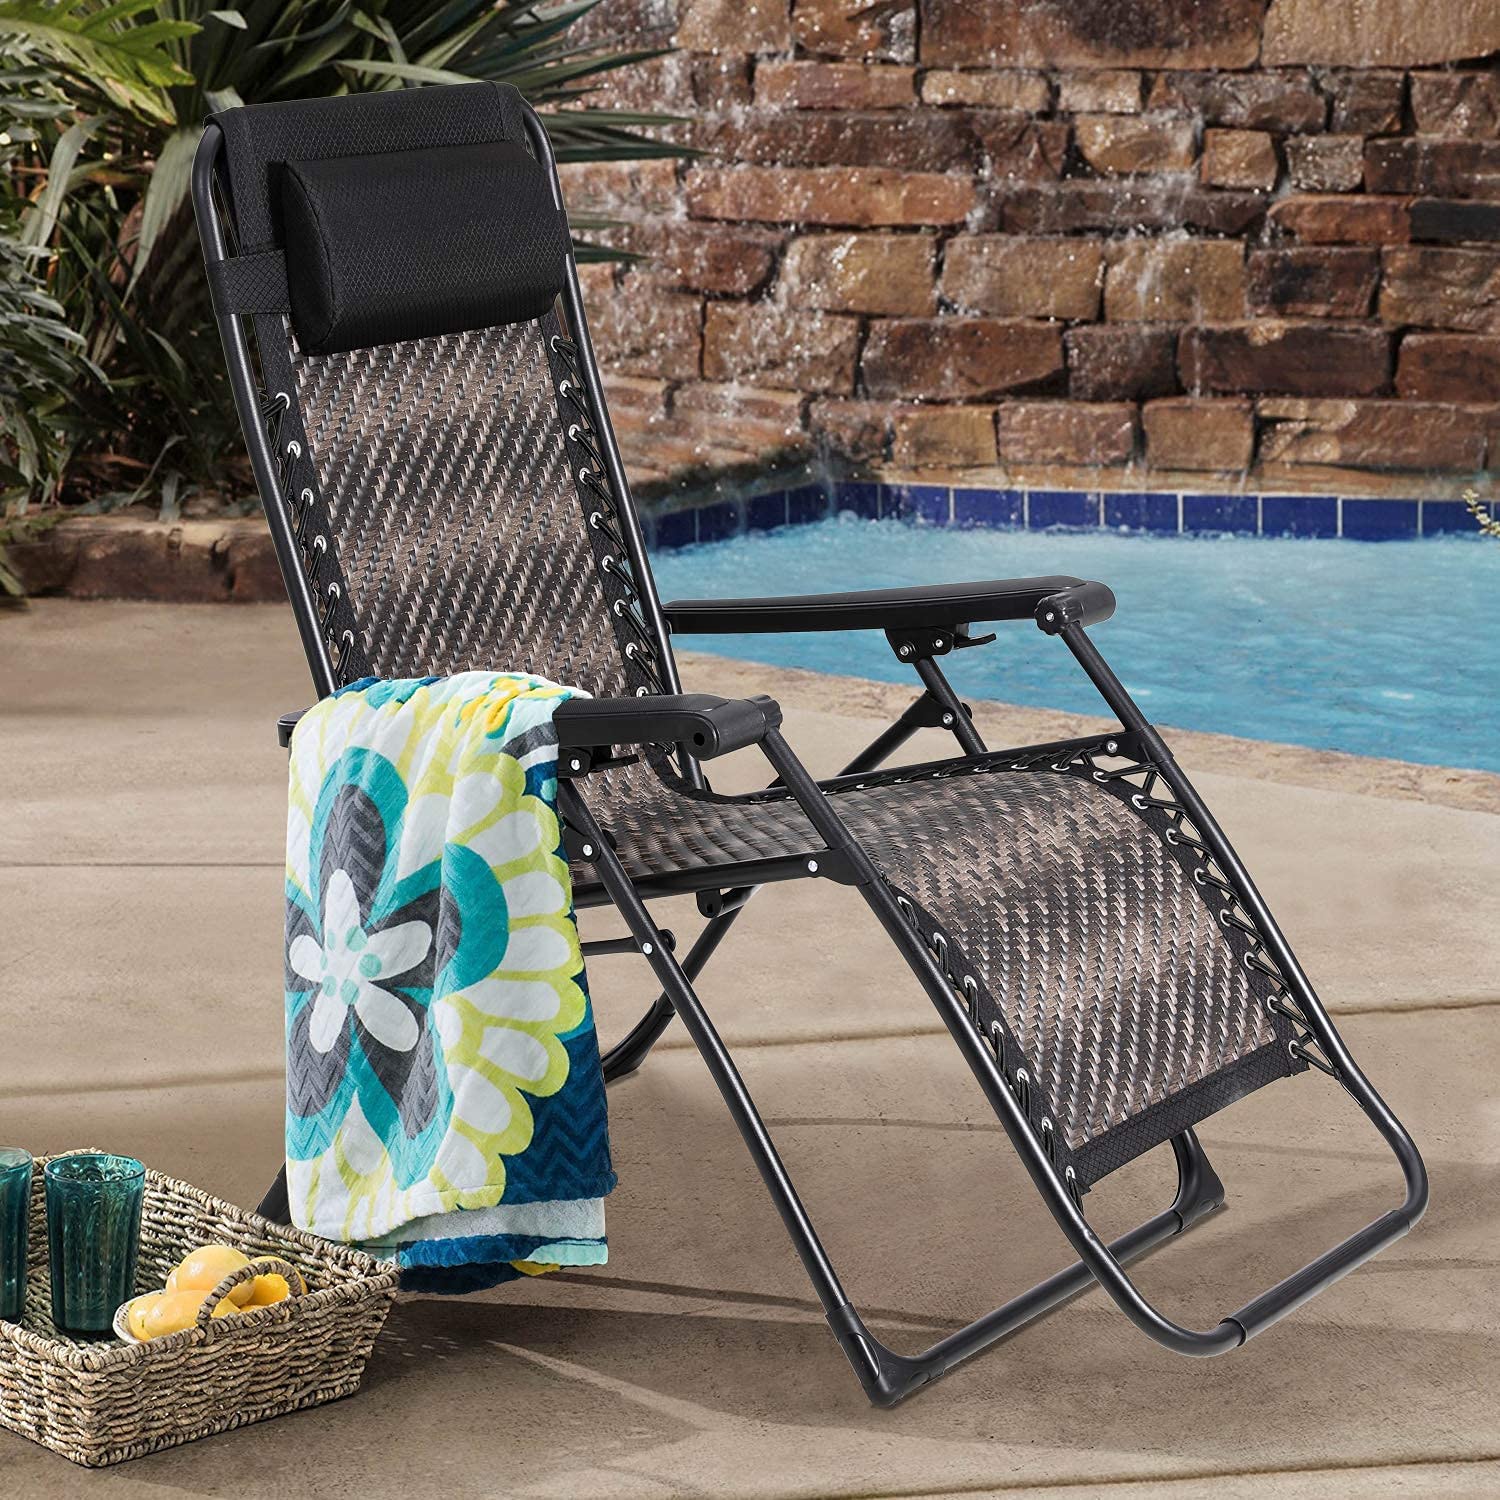 SOLAURA Zero Gravity Chair Outdoor Patio Adjustable Folding Wicker Recliner Lounge Chair - image 4 of 7